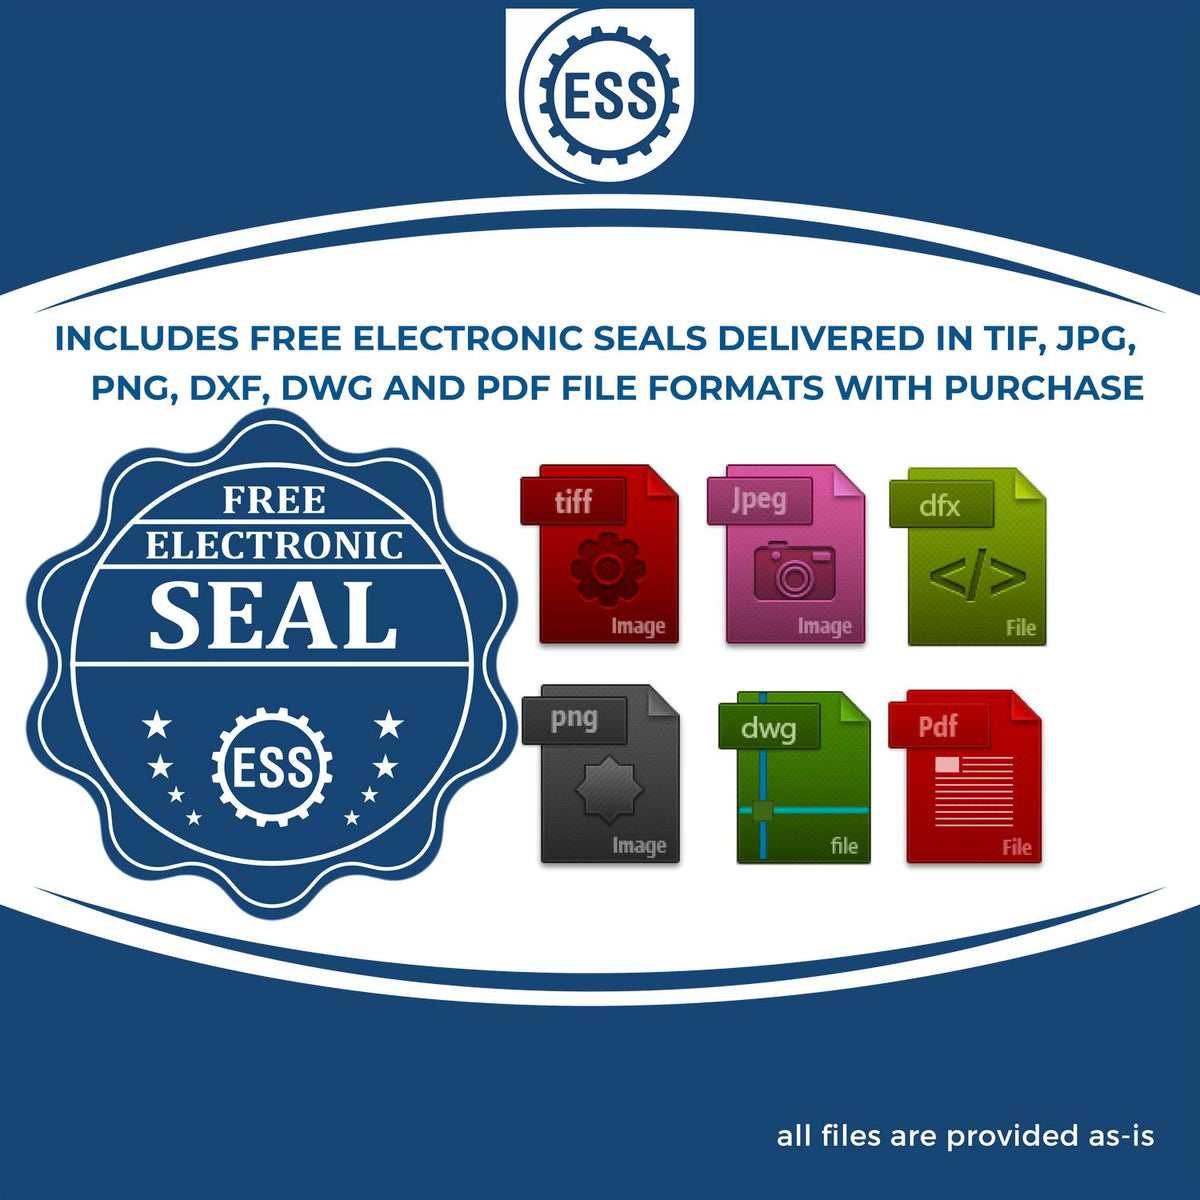 An infographic for the free electronic seal for the Long Reach Illinois Geology Seal illustrating the different file type icons such as DXF, DWG, TIF, JPG and PNG.